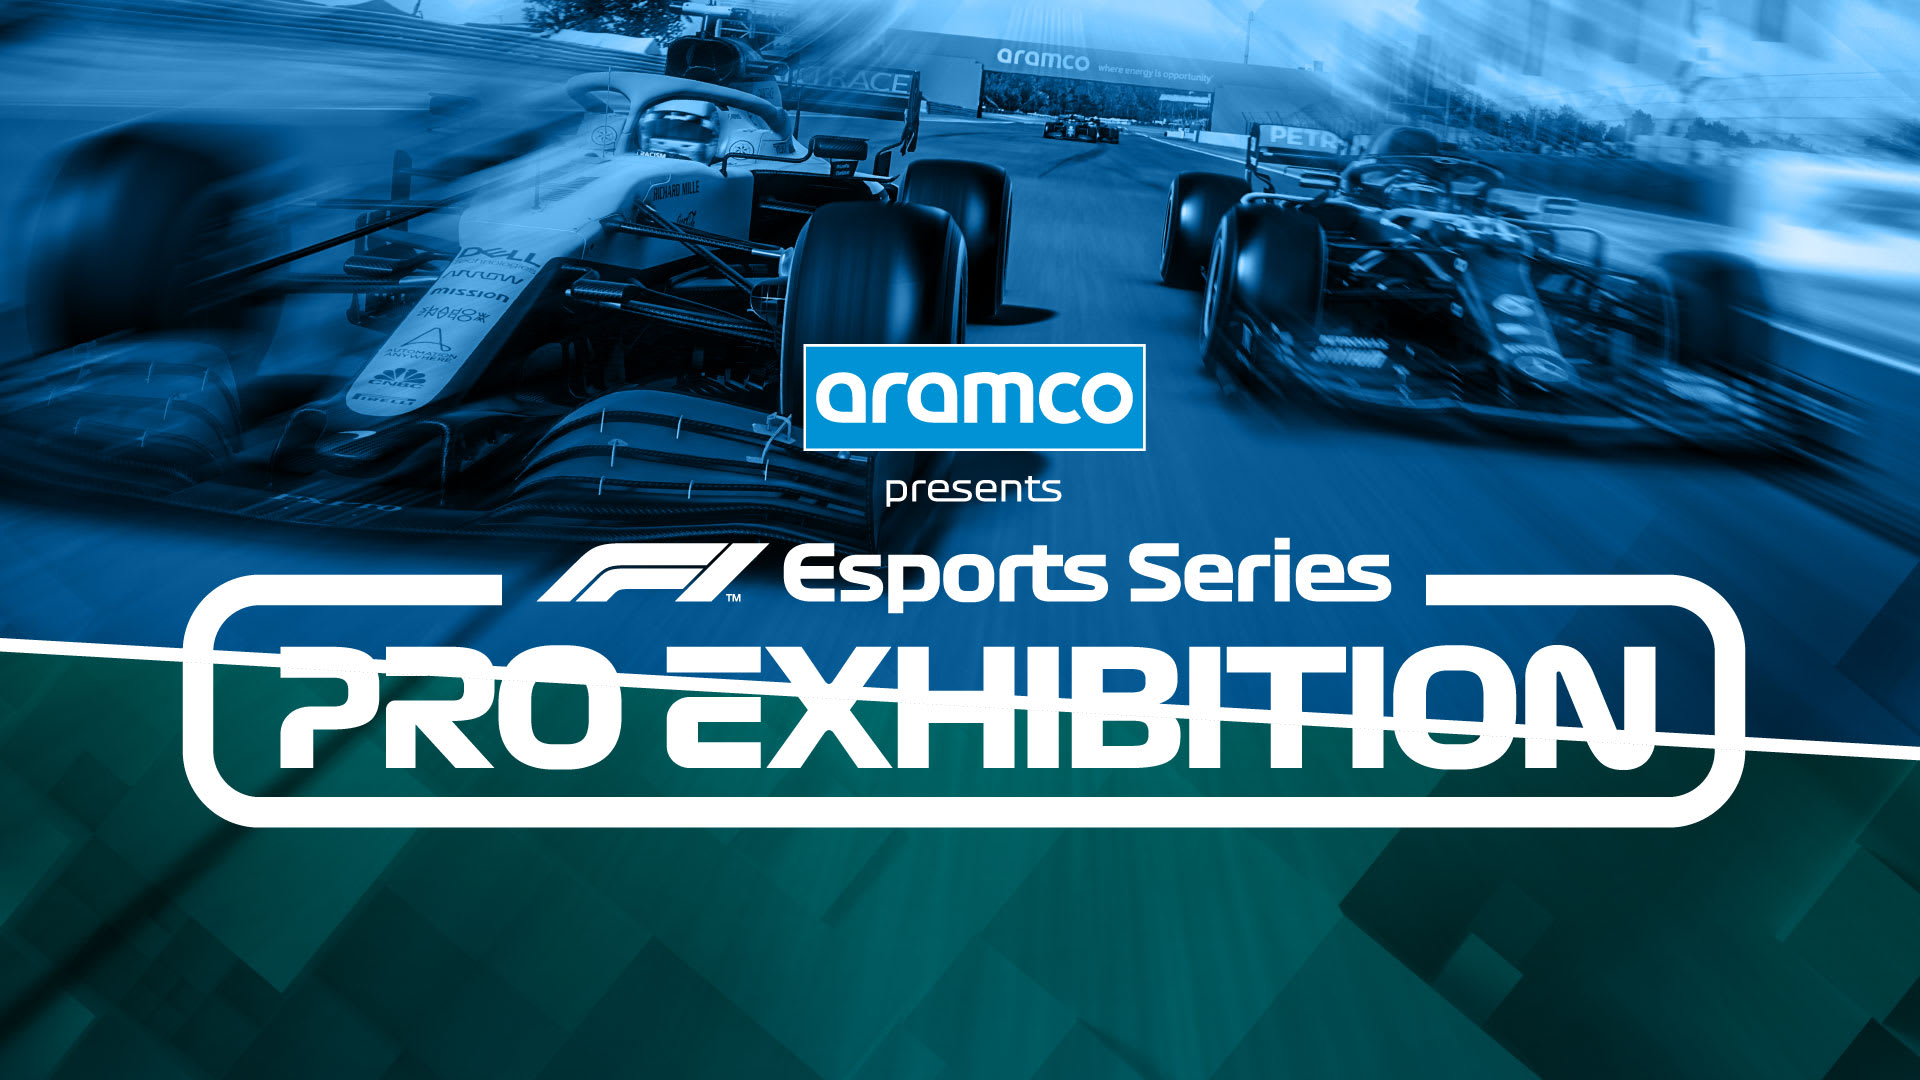 WATCH LIVE All the action from the F1 Esports Series Pro Exhibition Formula 1®